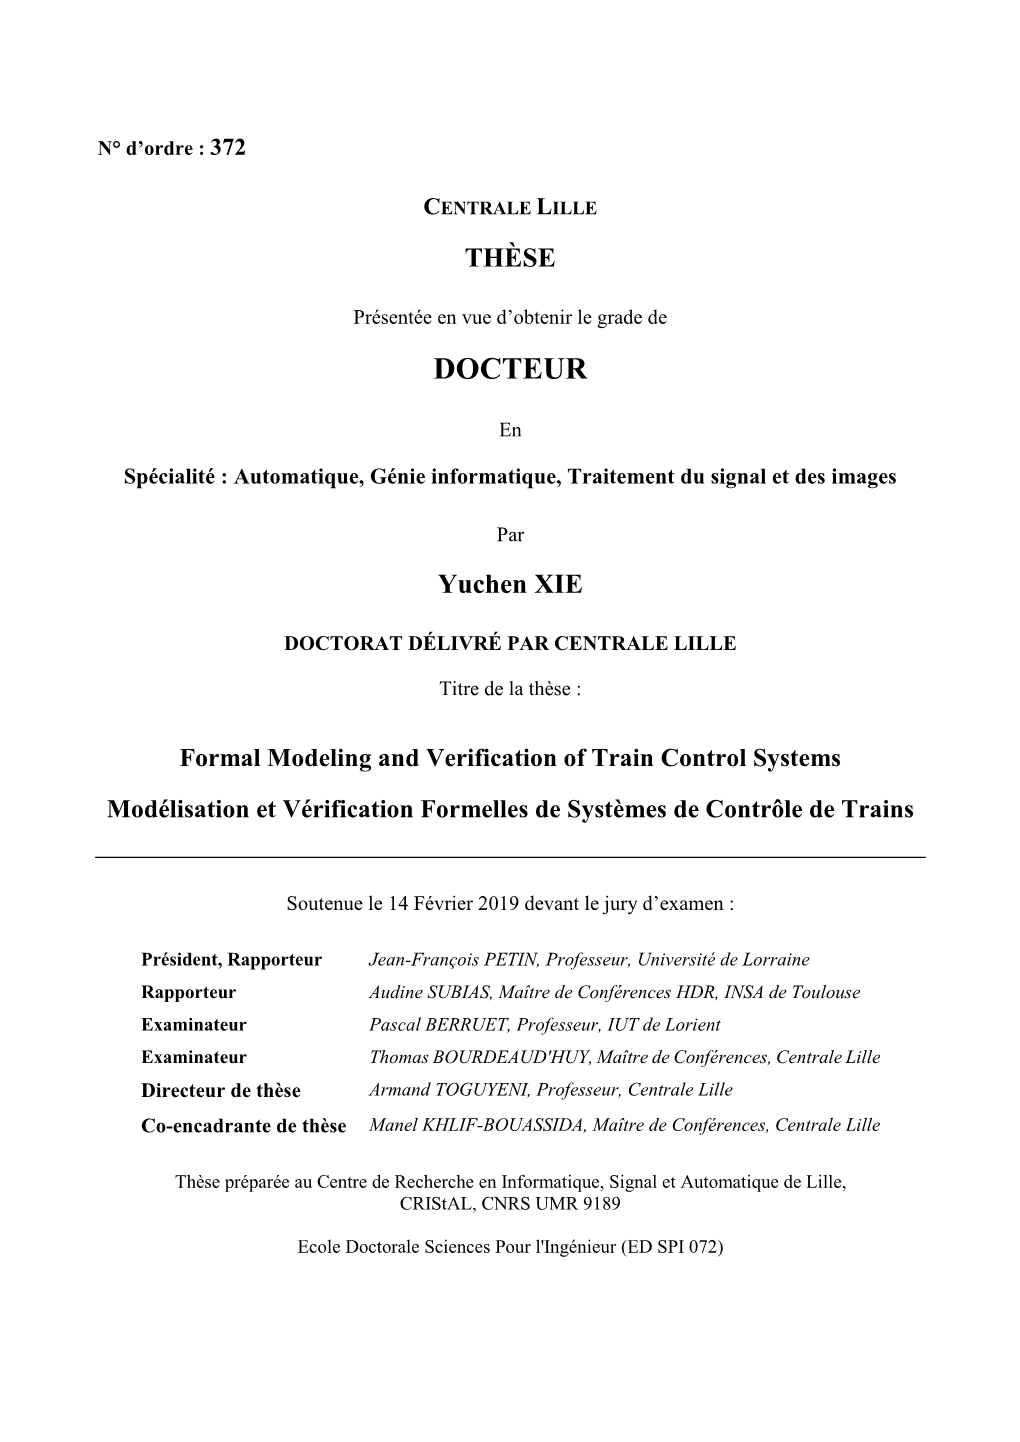 Formal Modeling and Verification of Train Control Systems